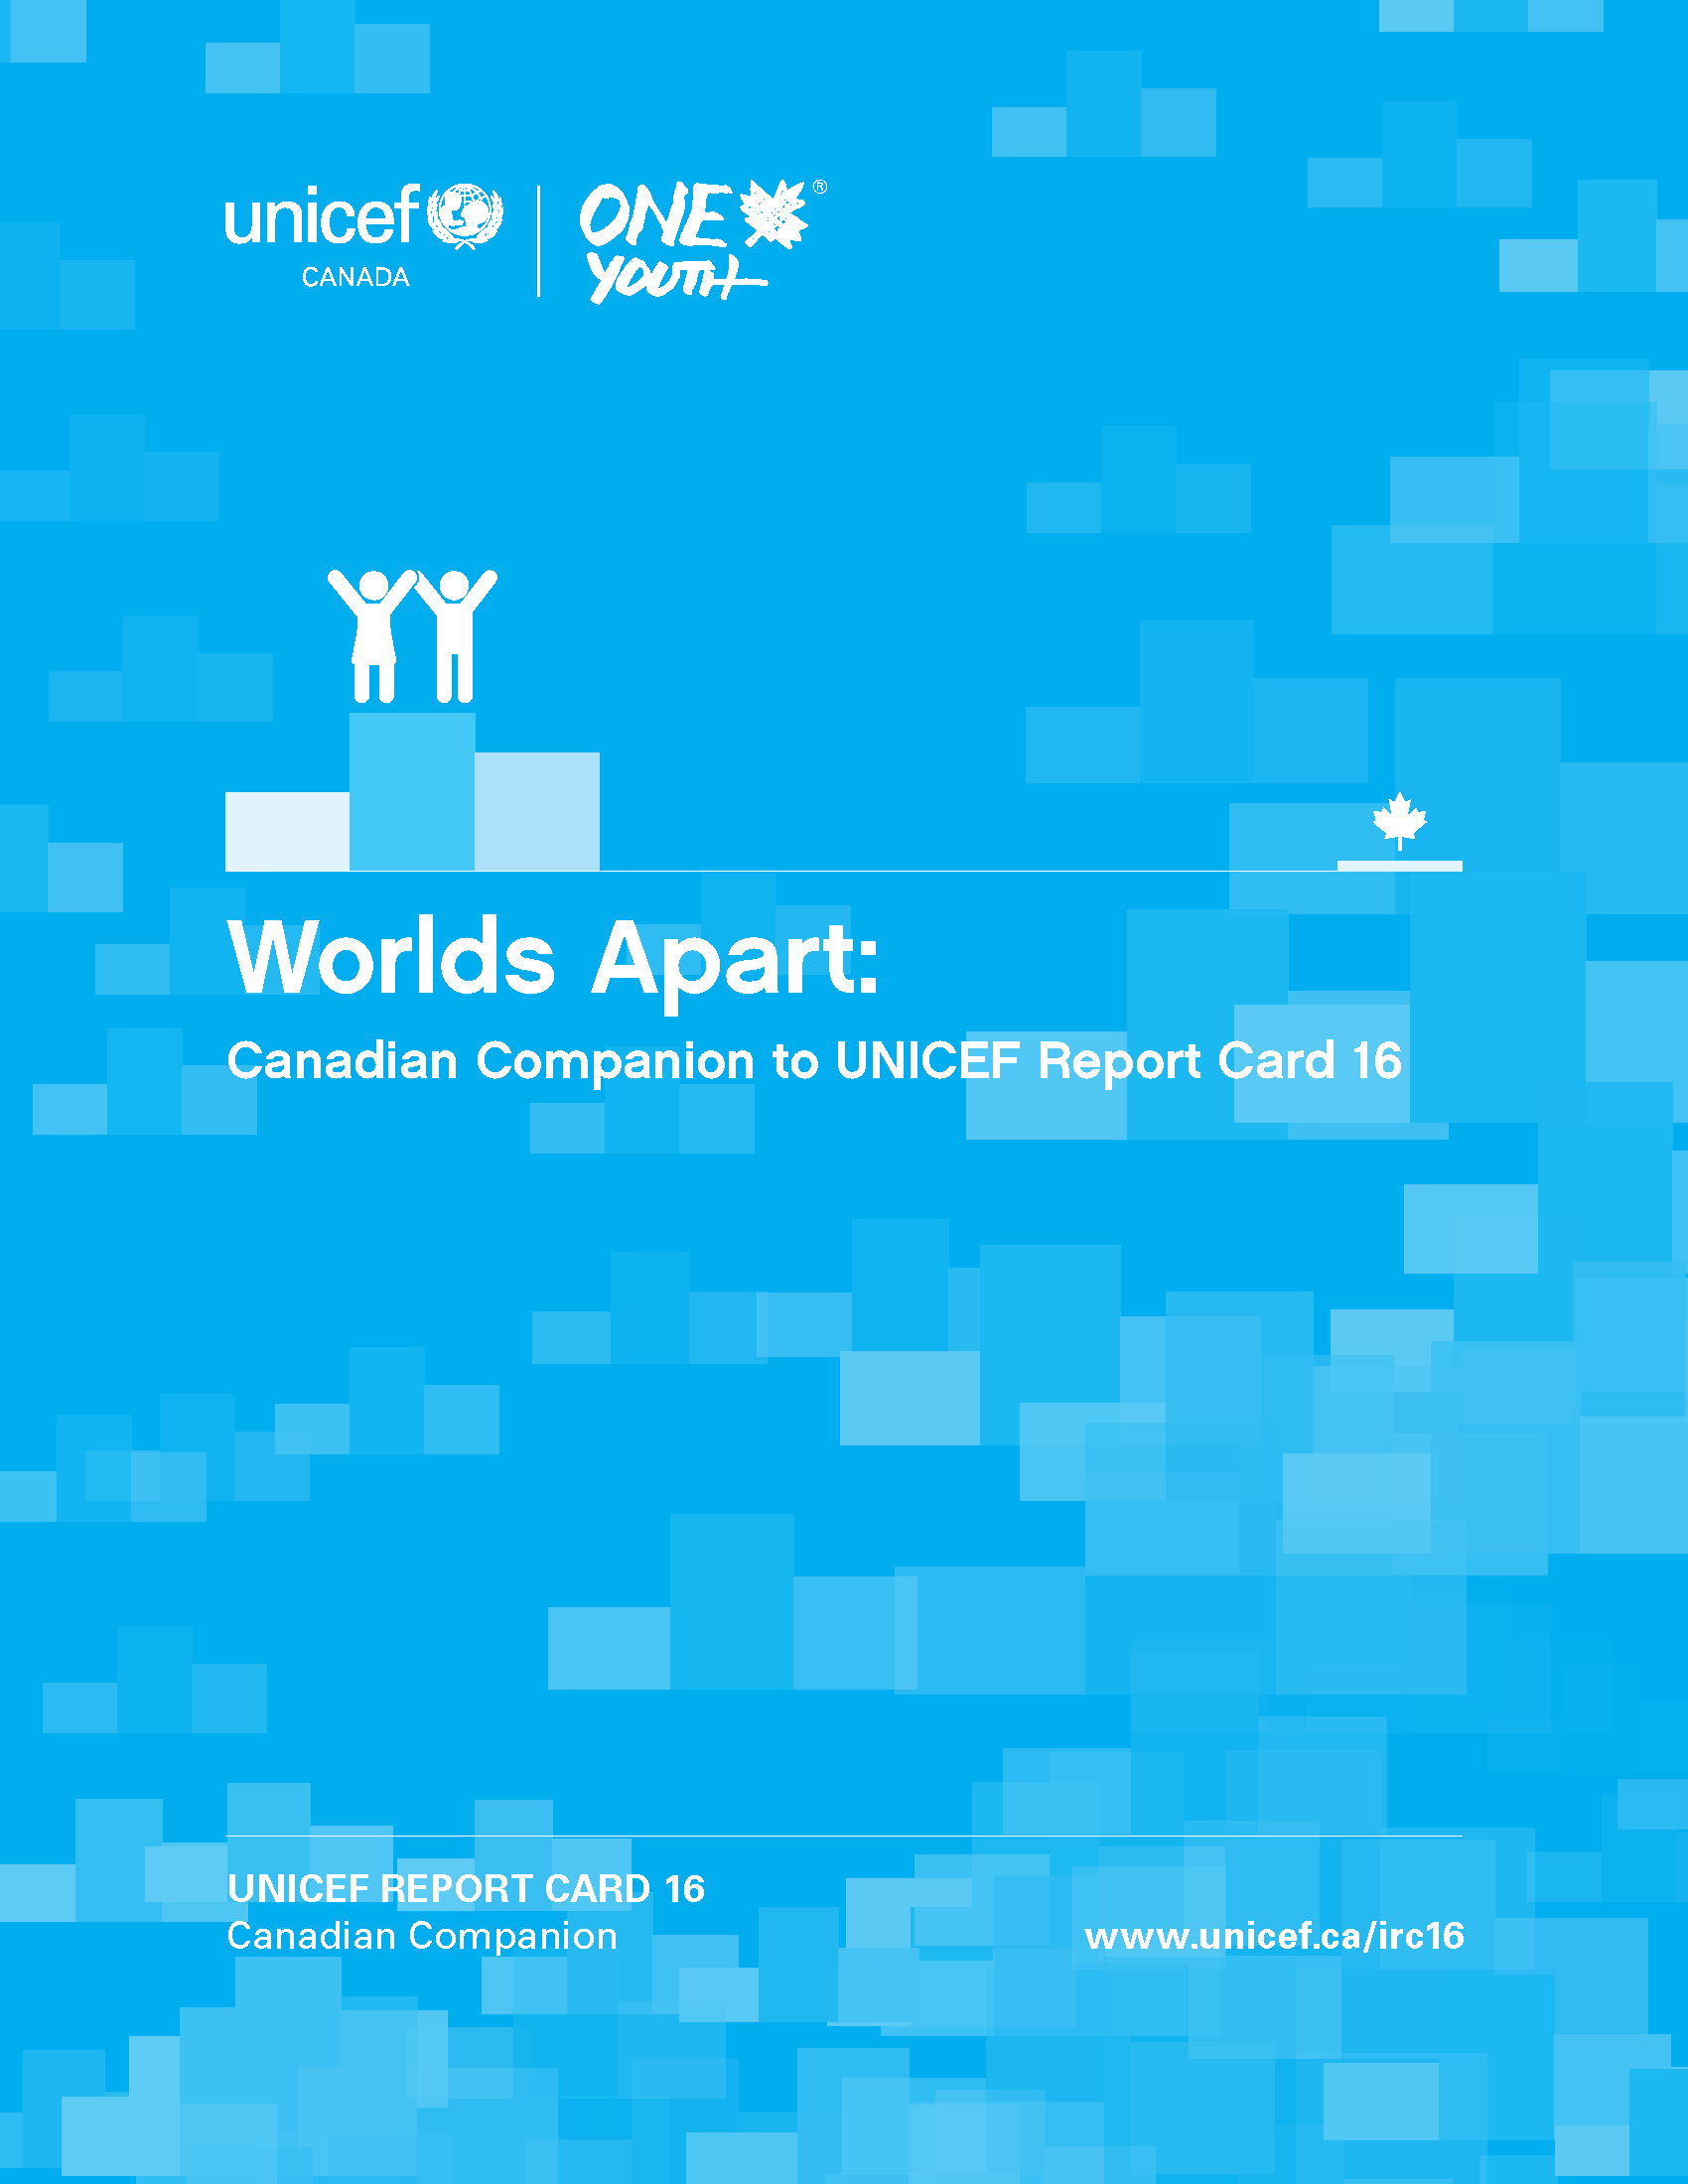 Cover of UNICEF Canadian Companion to Report Card 16. Links to a PDF on UNICEF's website.